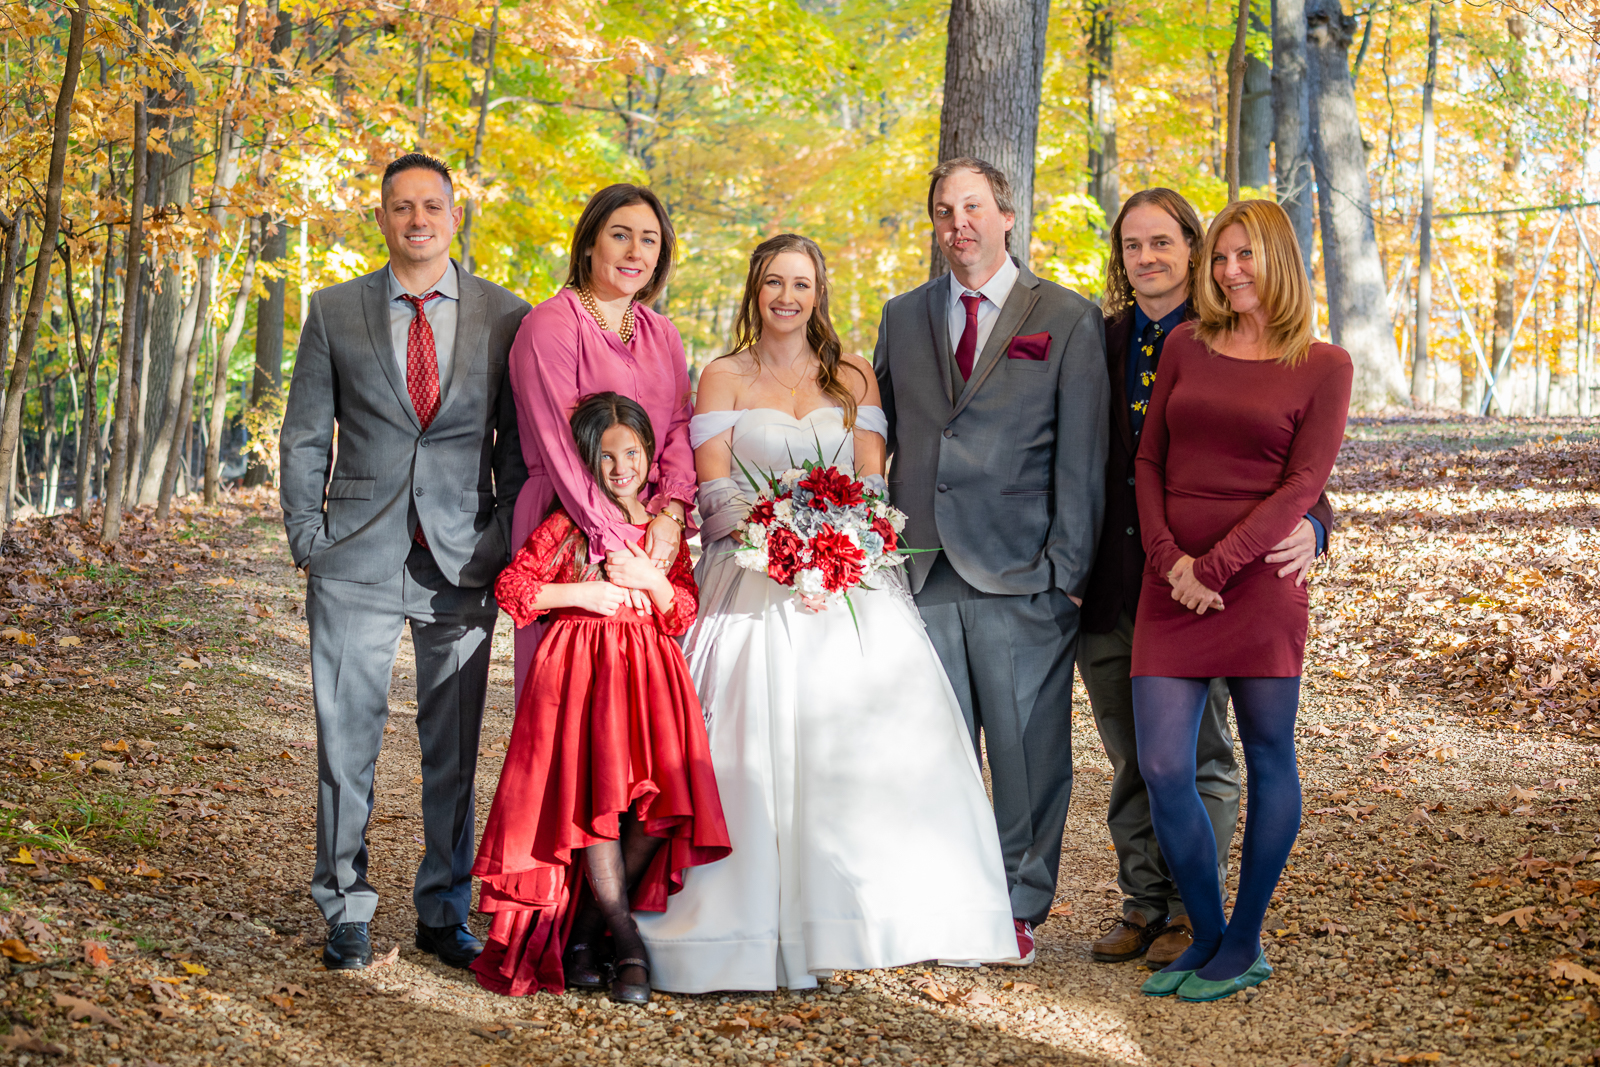 Bride and groom with family, family portrait, wedding portrait, fall wedding, outdoor wedding ceremony at German Central Organization